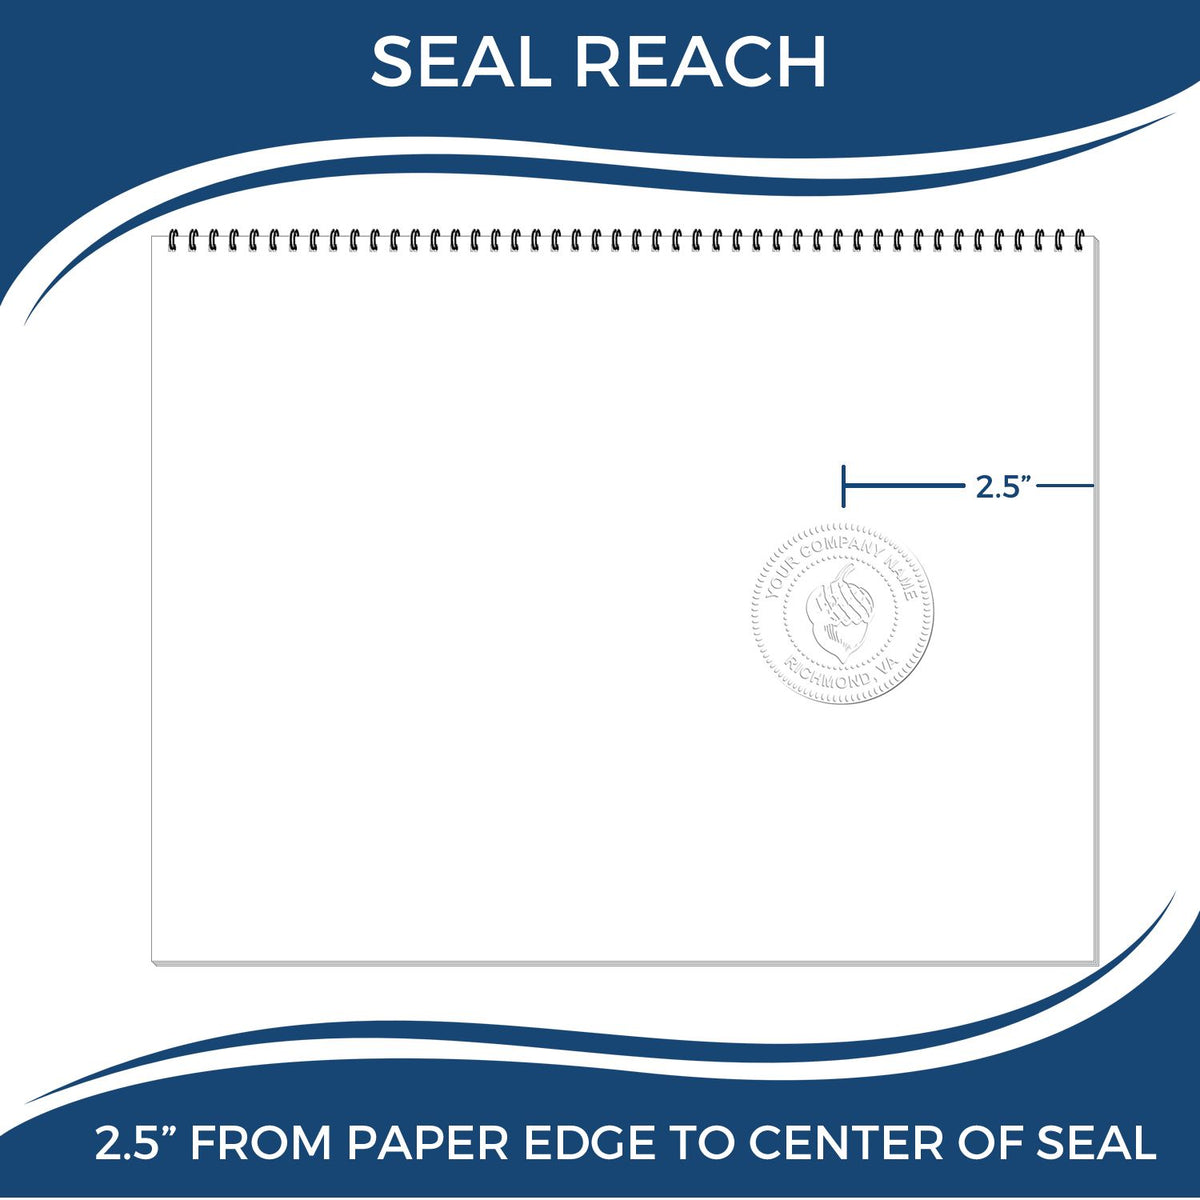 An infographic showing the seal reach which is represented by a ruler and a miniature seal image of the Heavy Duty Cast Iron Connecticut Engineer Seal Embosser